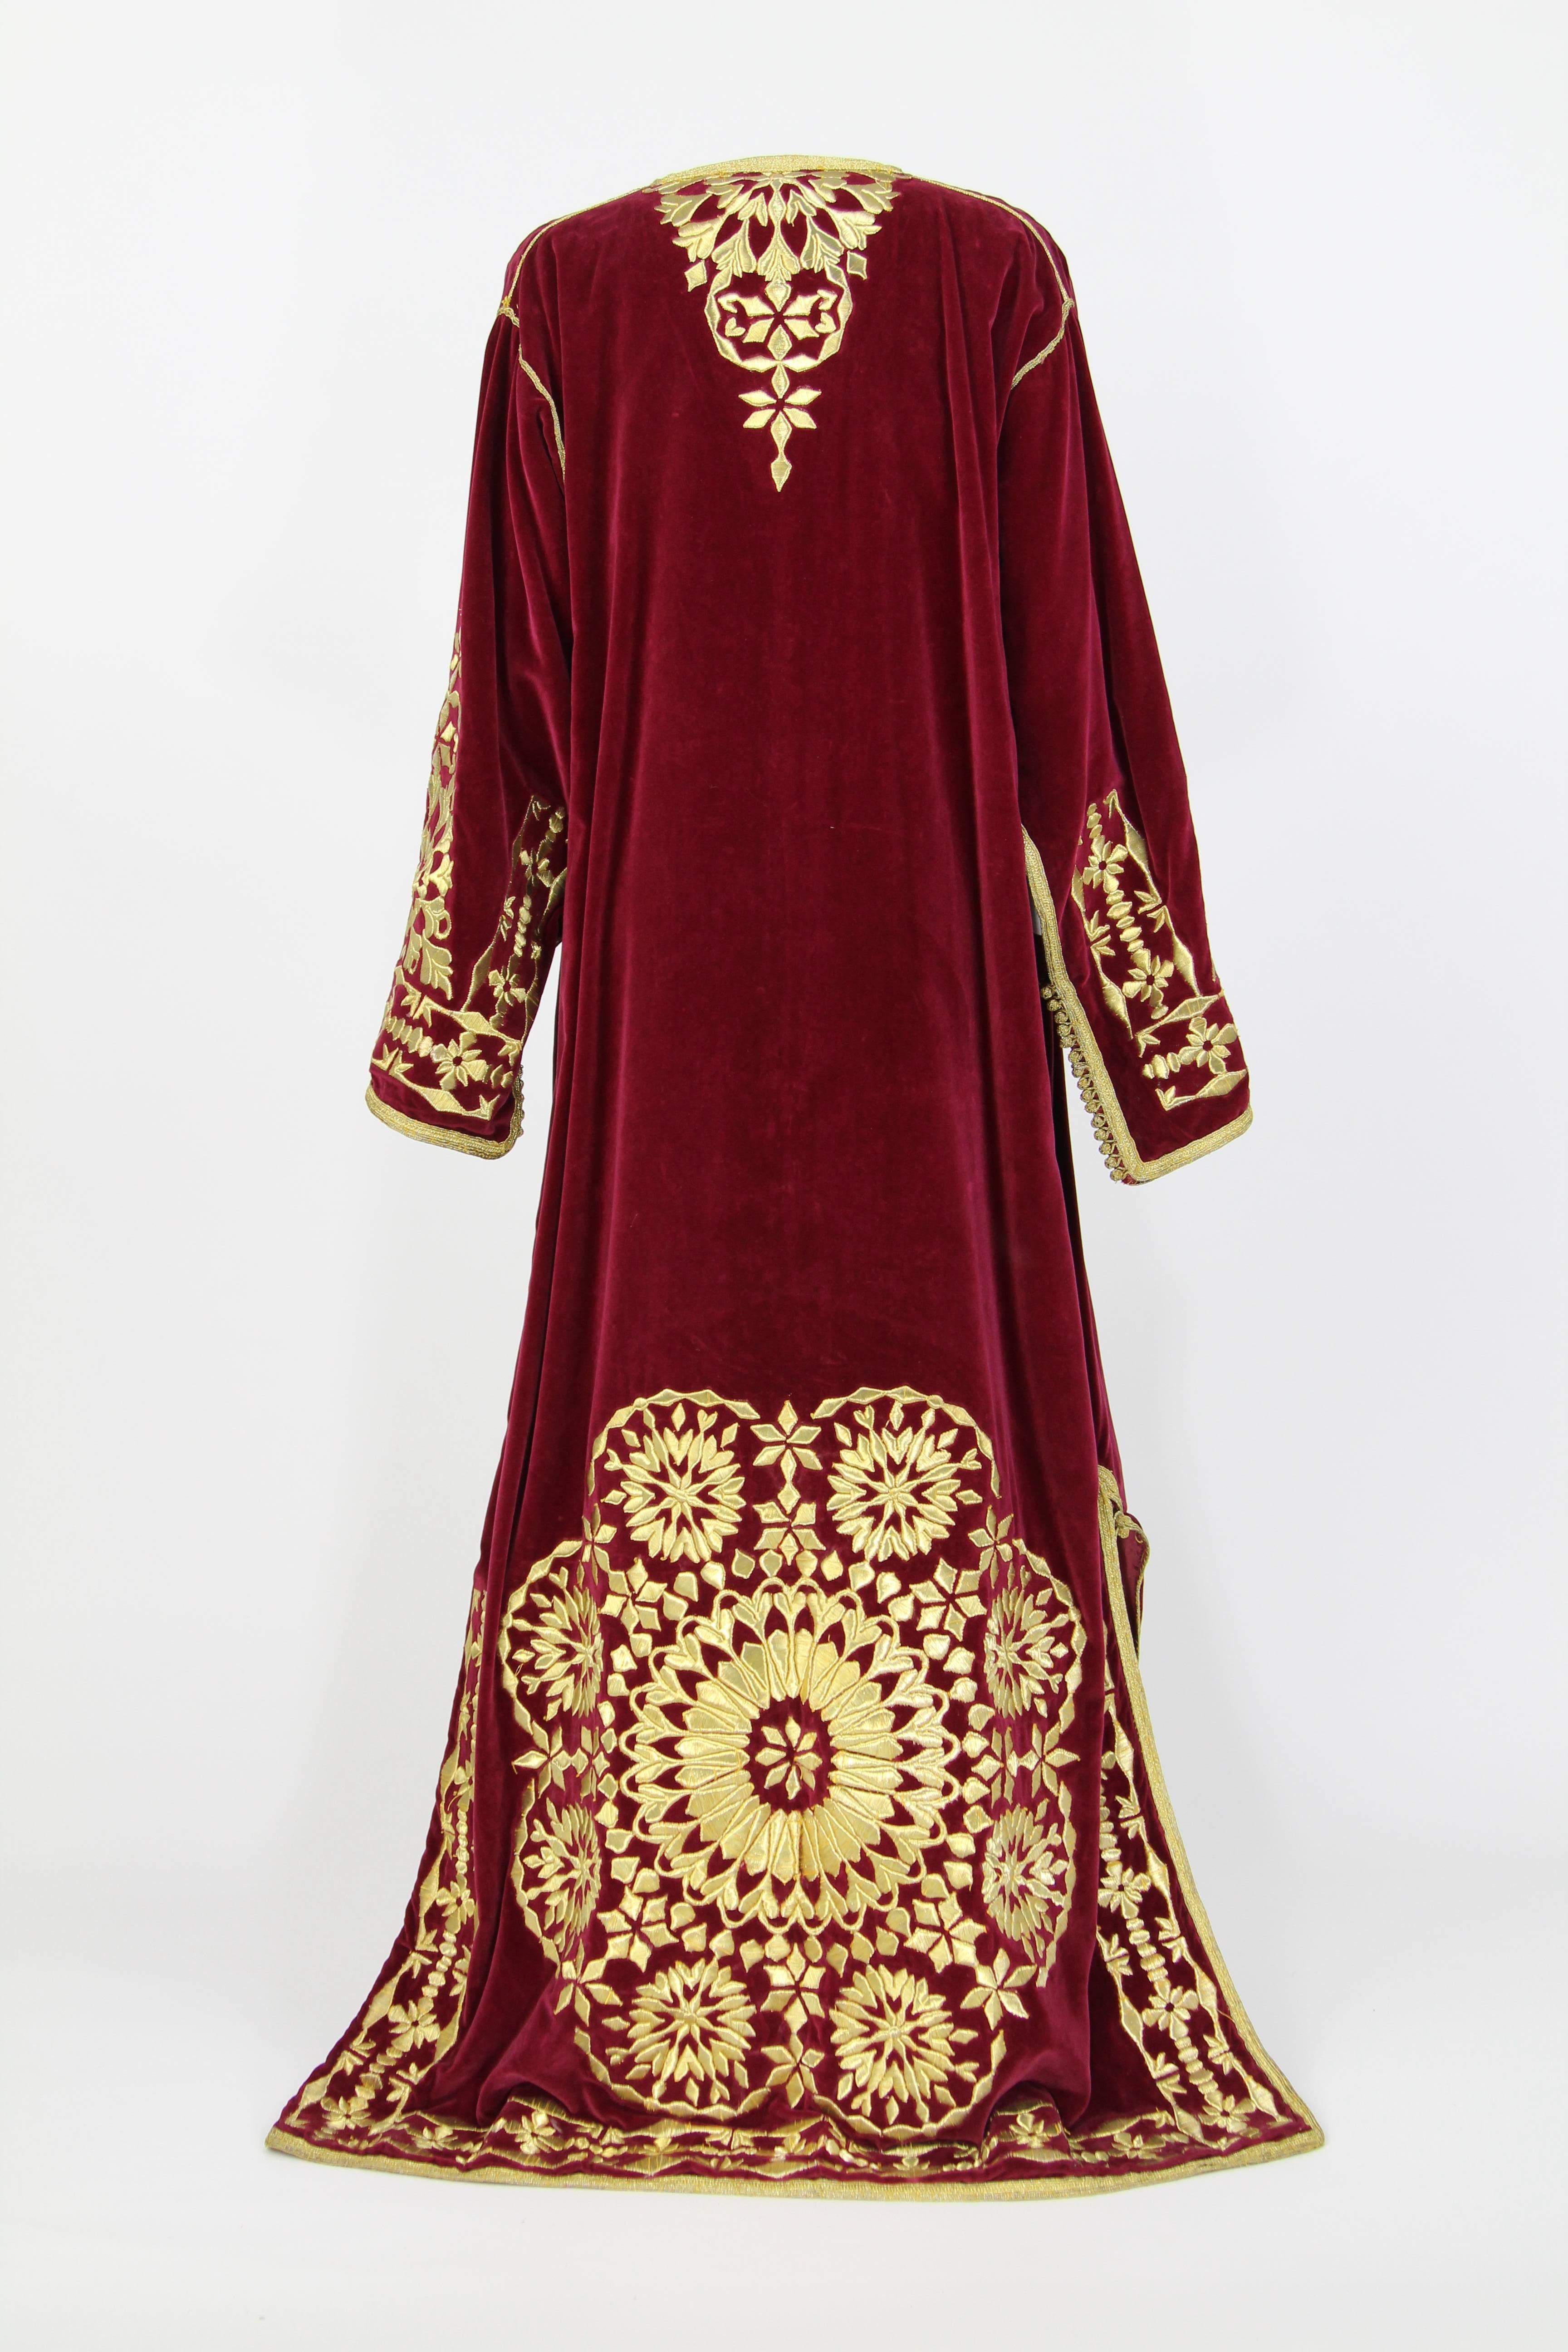 Artisanal Bordeaux velvet wedding Caftan featuring thread bathed in gold, which creates an incredible embroidery. Slightly flared sleeves.
This caftan was handmade in Maghreb during the 1970s and it is in good conditions.
The shoulders measure